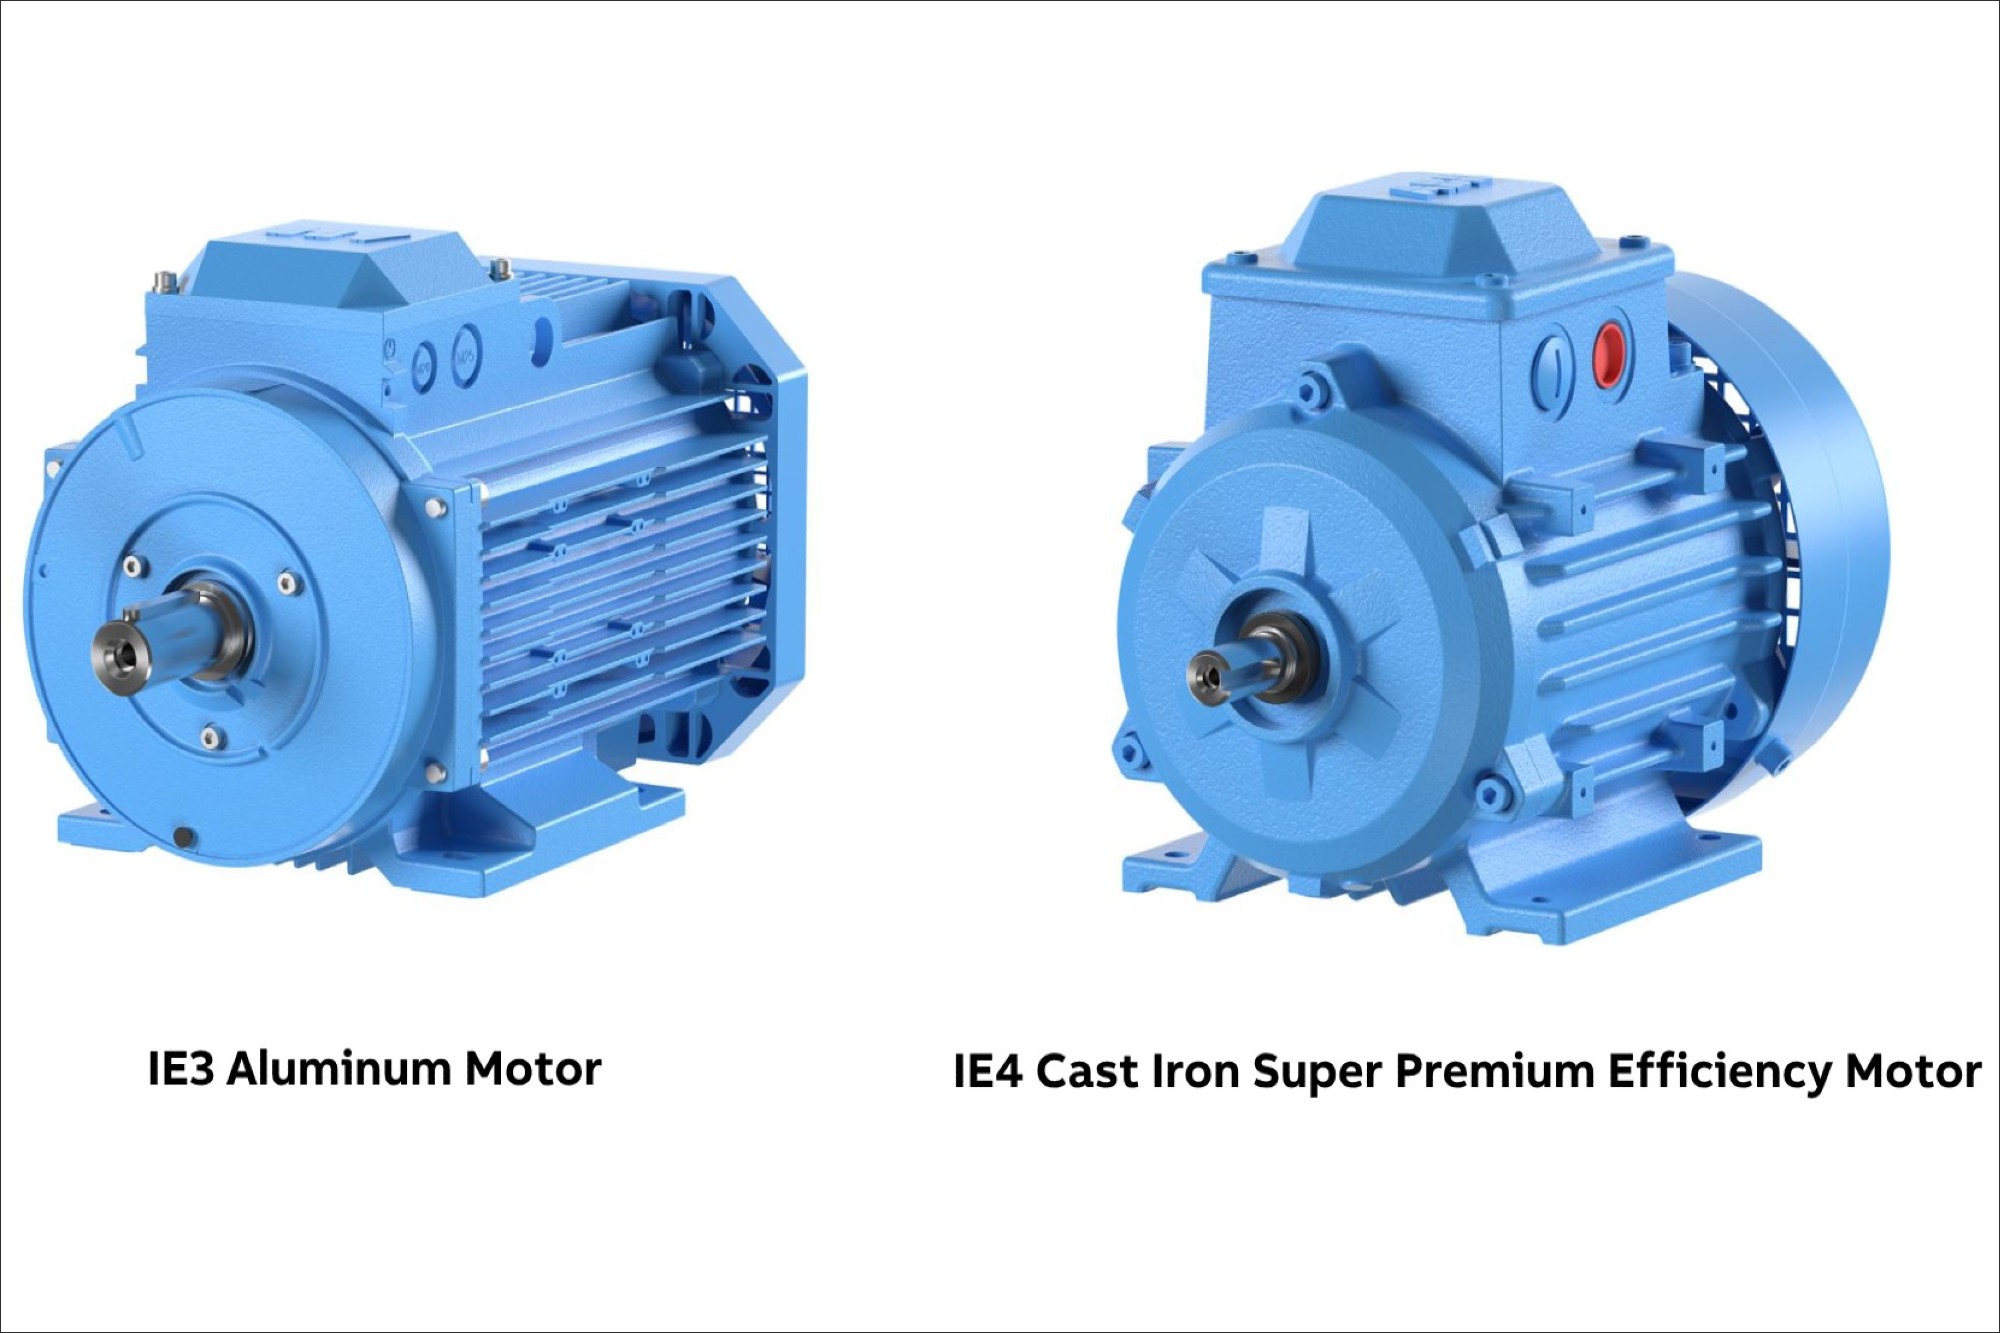 ABB India launches energy efficient motor ranges for sustainable industrial growth